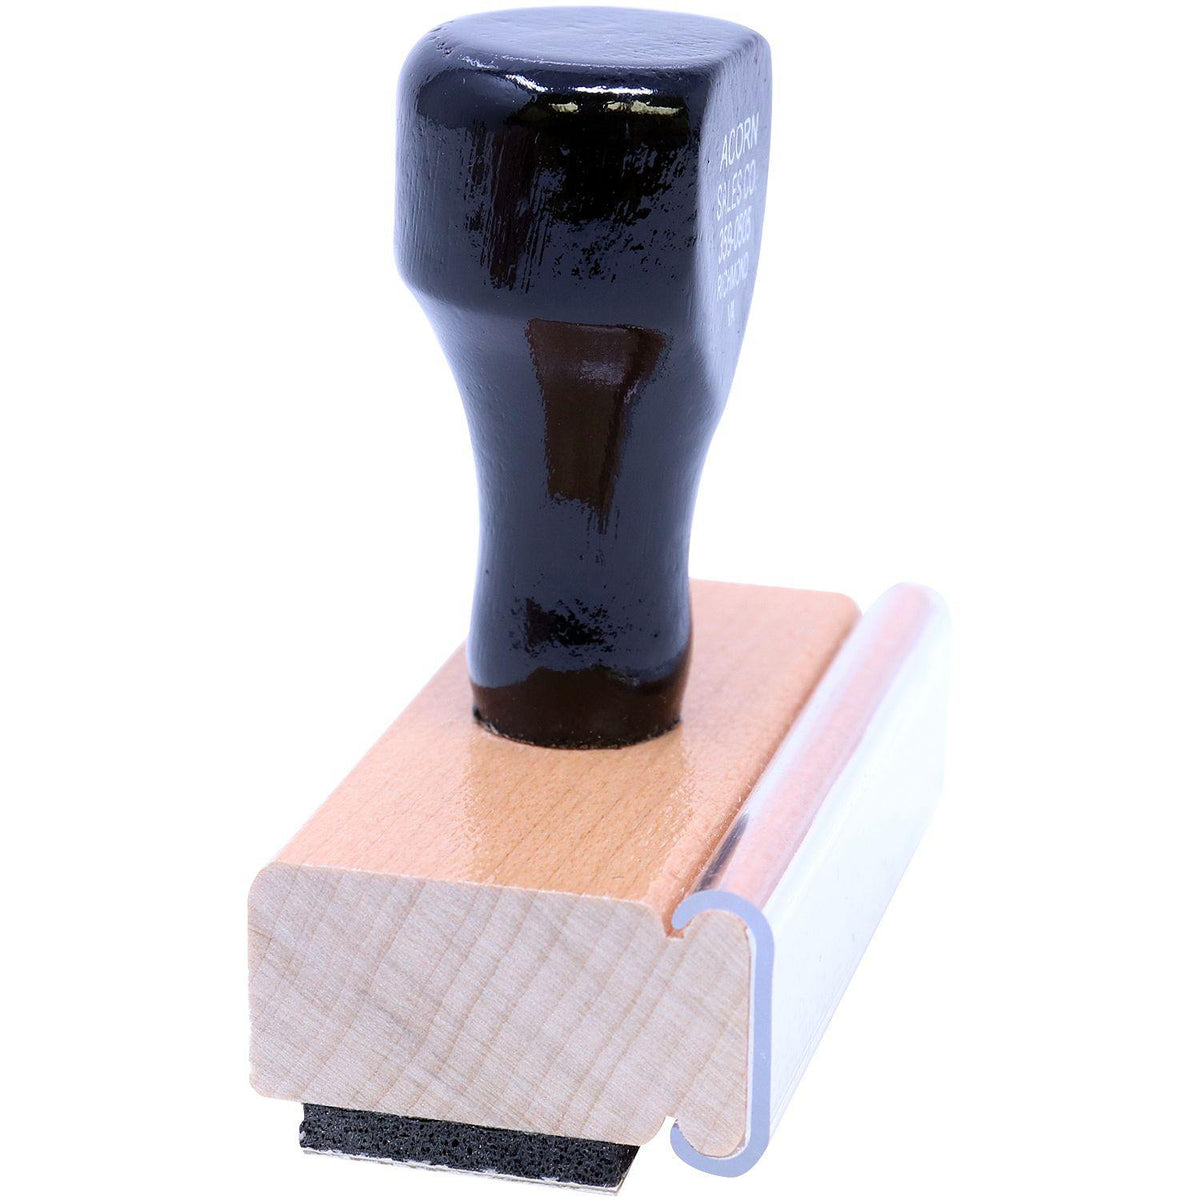 Name Rubber Stamp - Engineer Seal Stamps - Brand_Acorn, Impression Size_Small, Stamp Type_Regular Stamp, Type of Use_Teacher